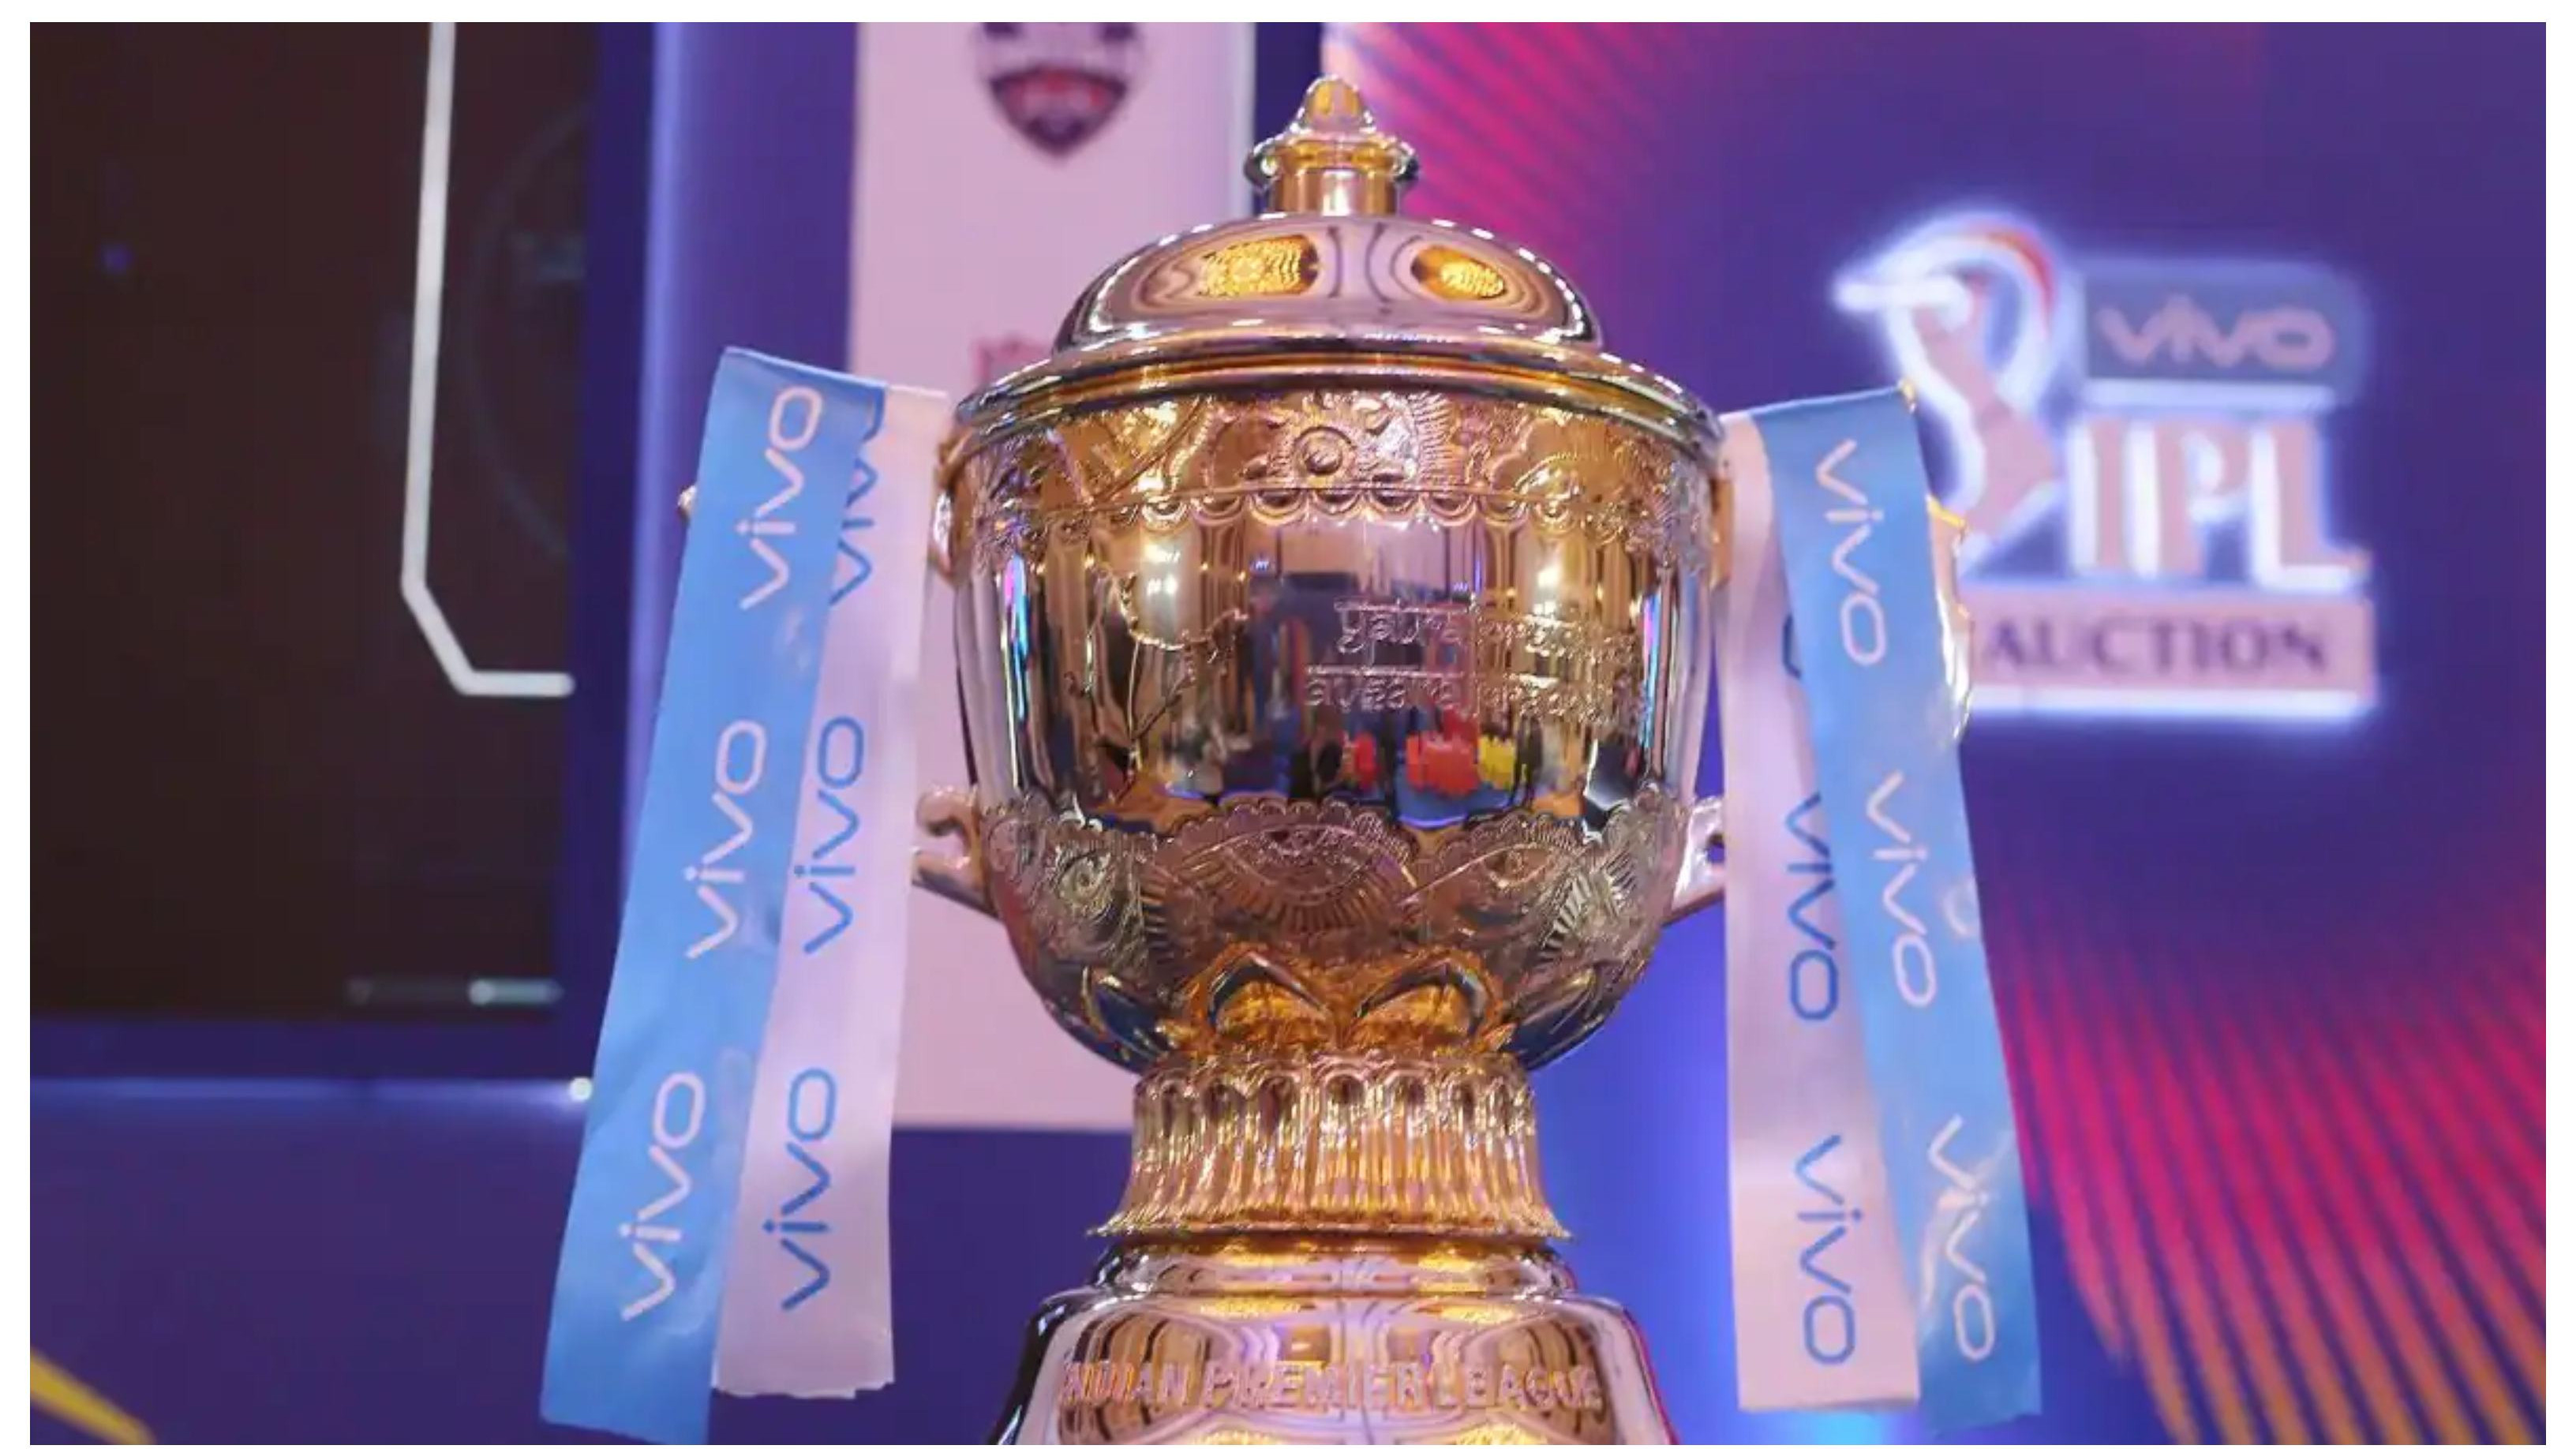 Franchises can retain four players, two new teams to be added ahead of IPL 2022: Report